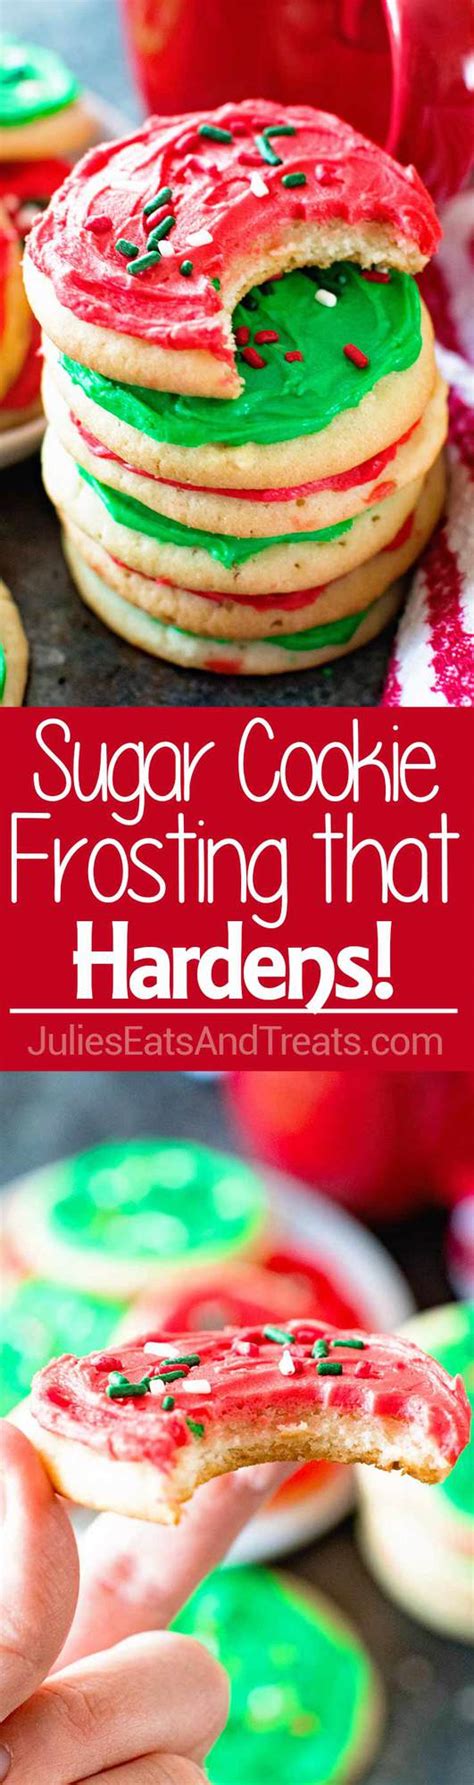 Follow these steps to make a buttercream frosting that will harden to perfection on your favorite cookie recipe, so you can stack and enjoy. Homemade Sugar Cookie Frosting that Hardens! - Julie's ...